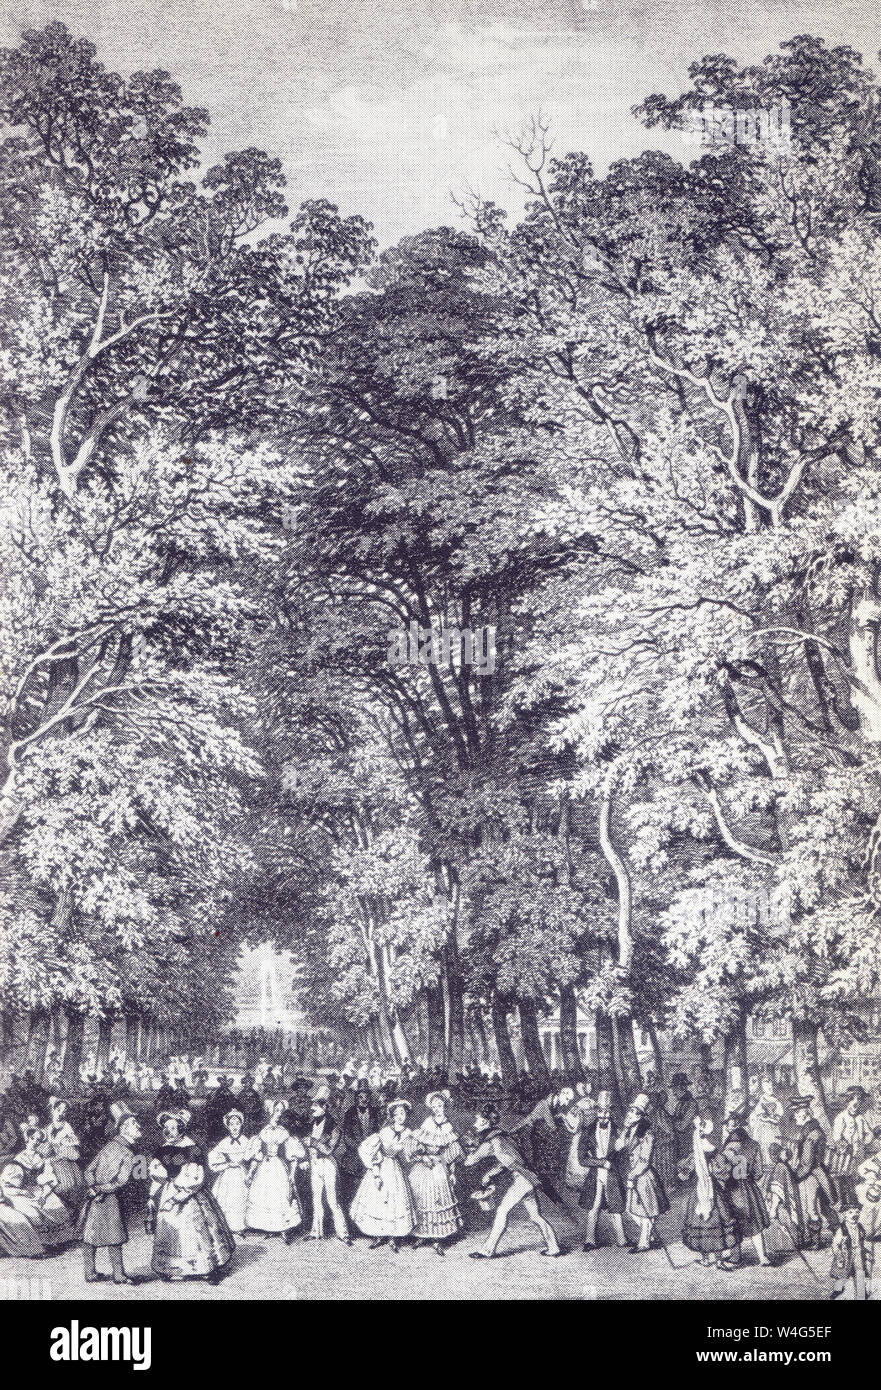 the big avenue in Bad Pyrmont, Germany. lithography by G. Osterwald 1850 Stock Photo